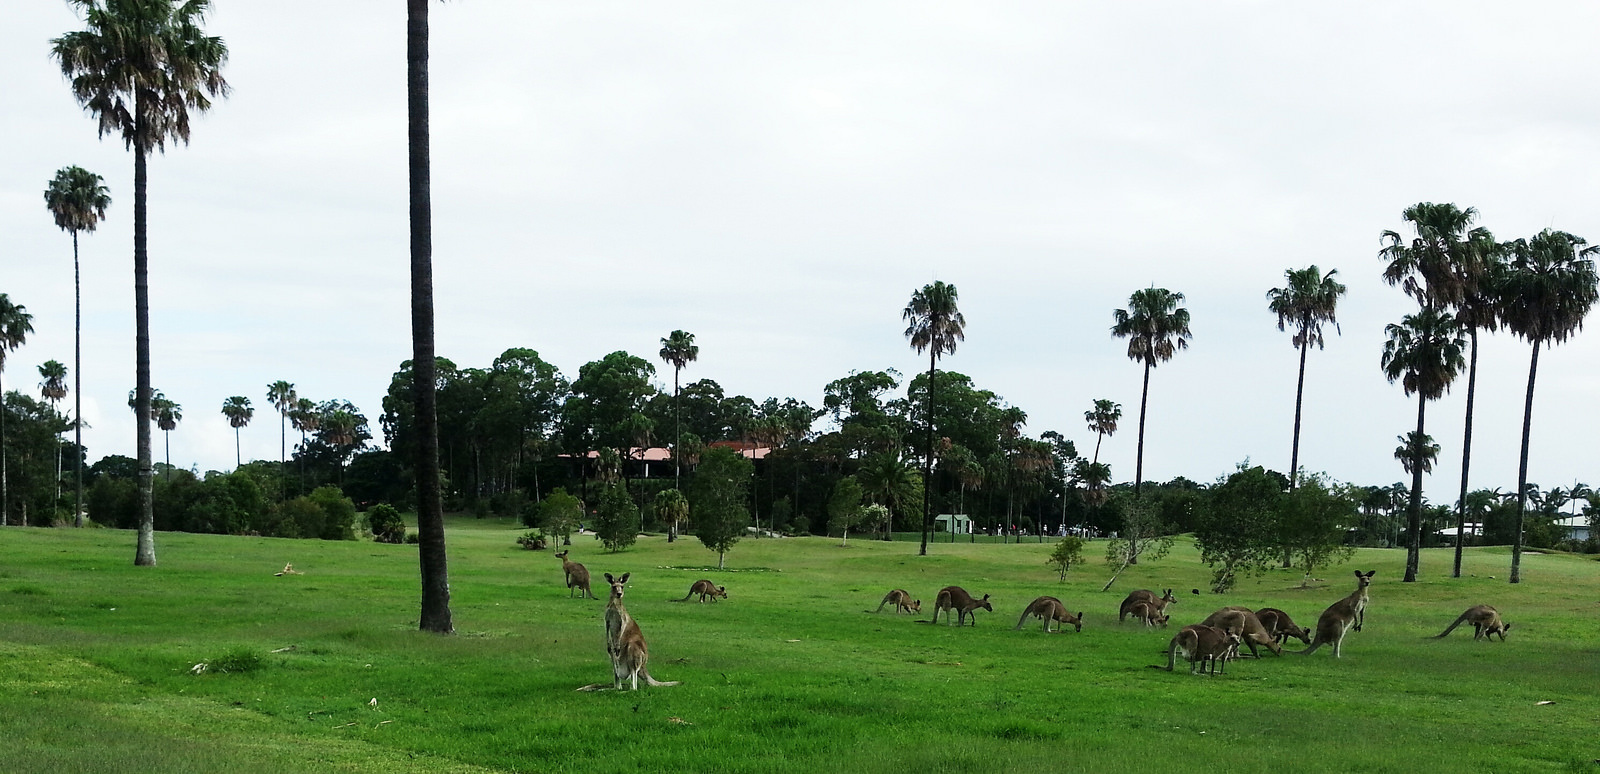 There are approximately 25 million kangaroos in Australia. The human population is just a mere 23,856,200.